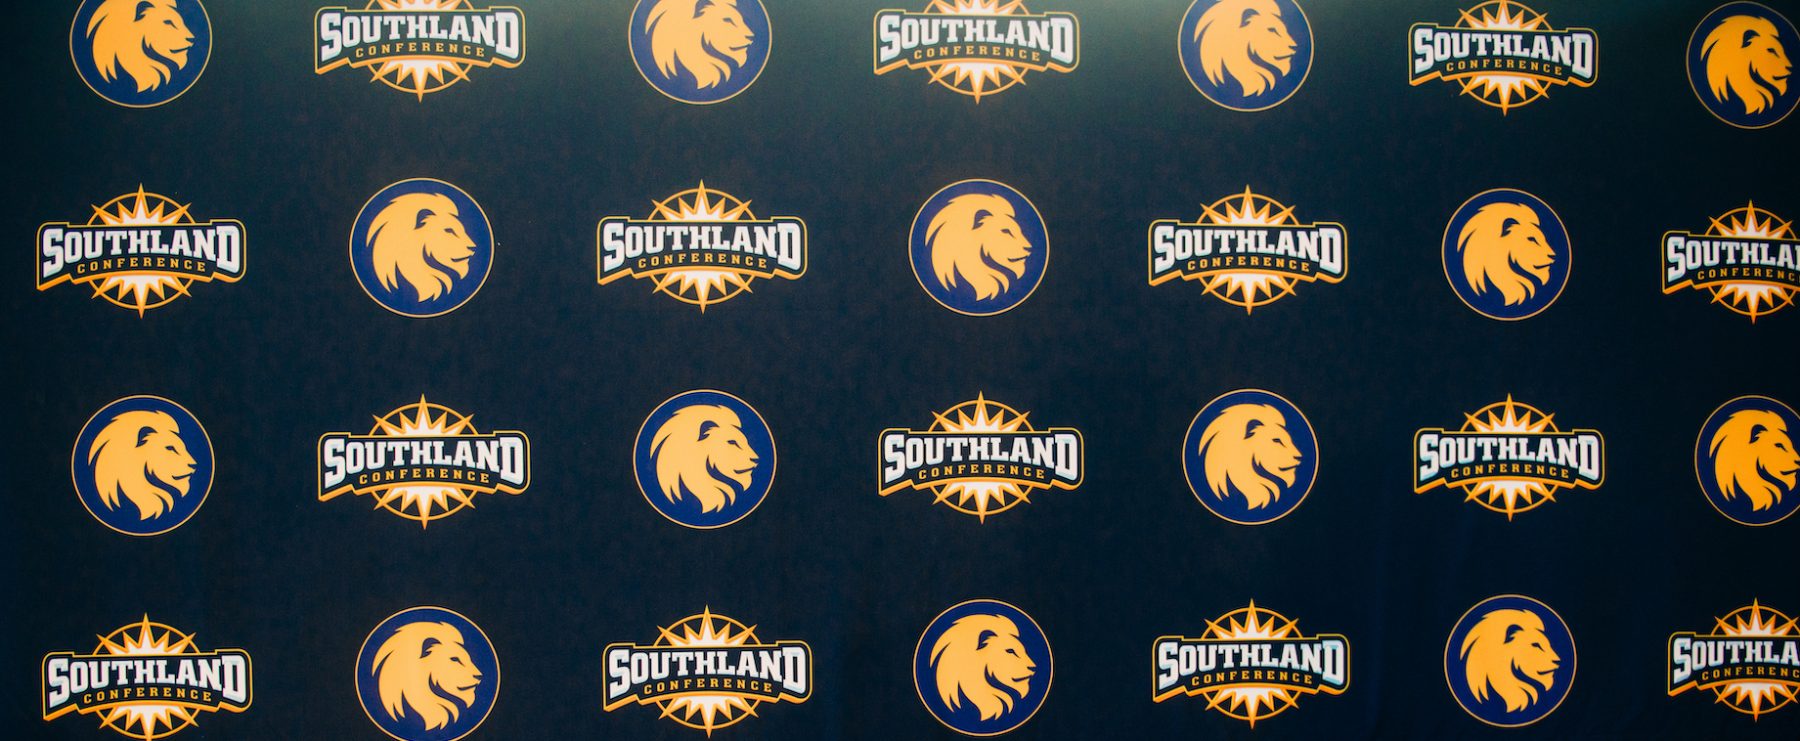 A decorative backdrop featuring the logos of A&M-Commerce and the Southland Conference